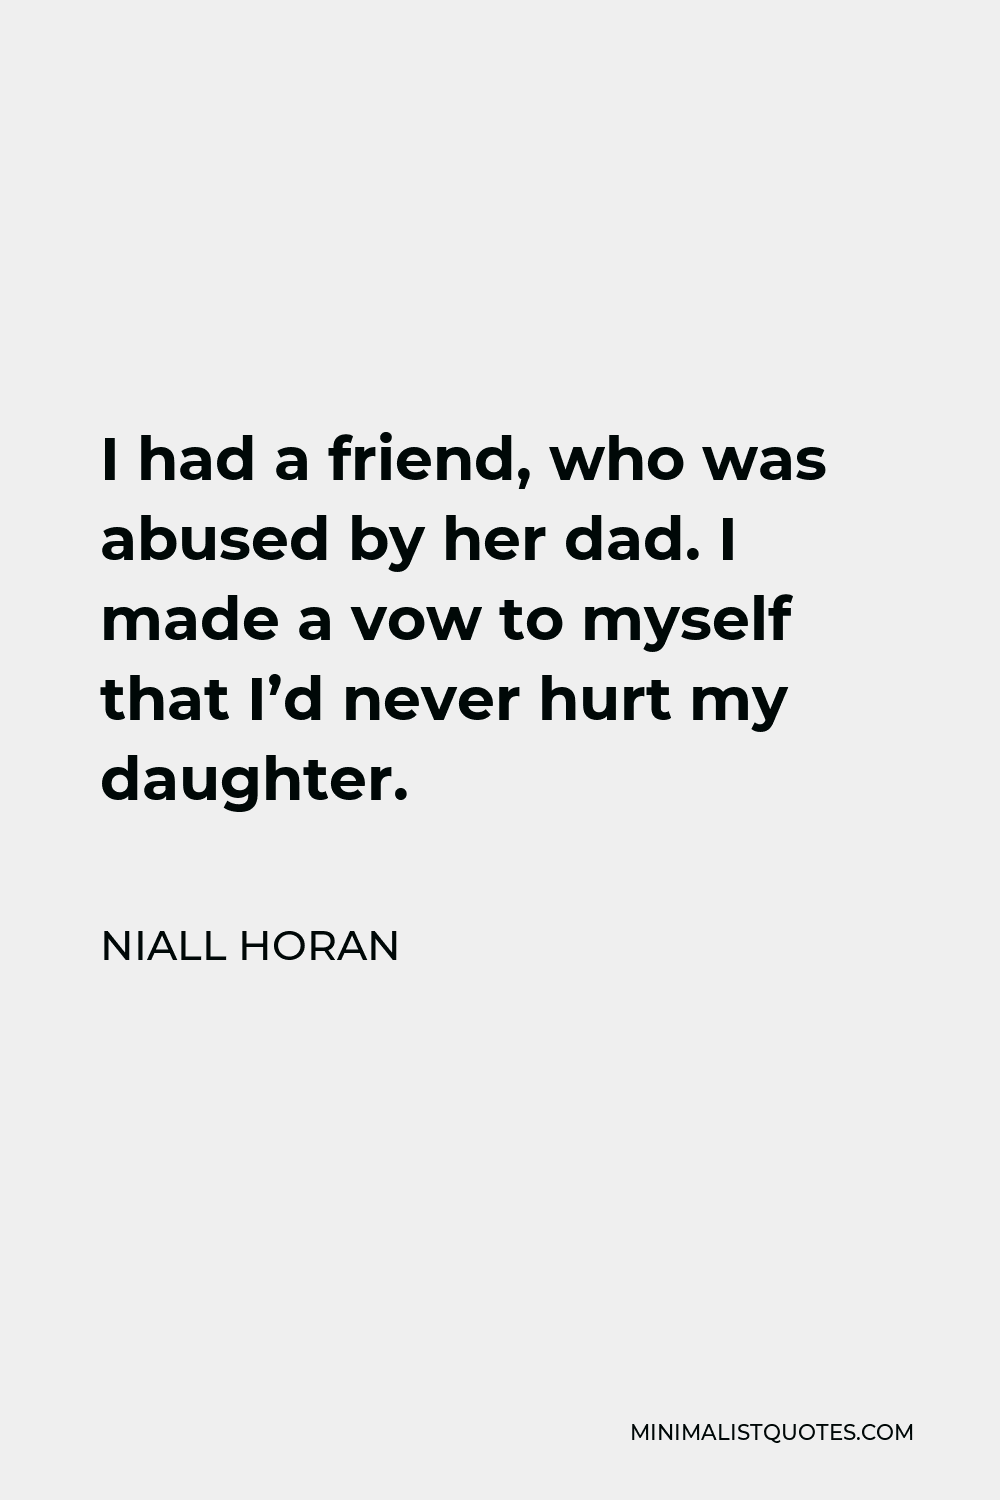 Niall Horan Quote - I had a friend, who was abused by her dad. I made a vow to myself that I’d never hurt my daughter.